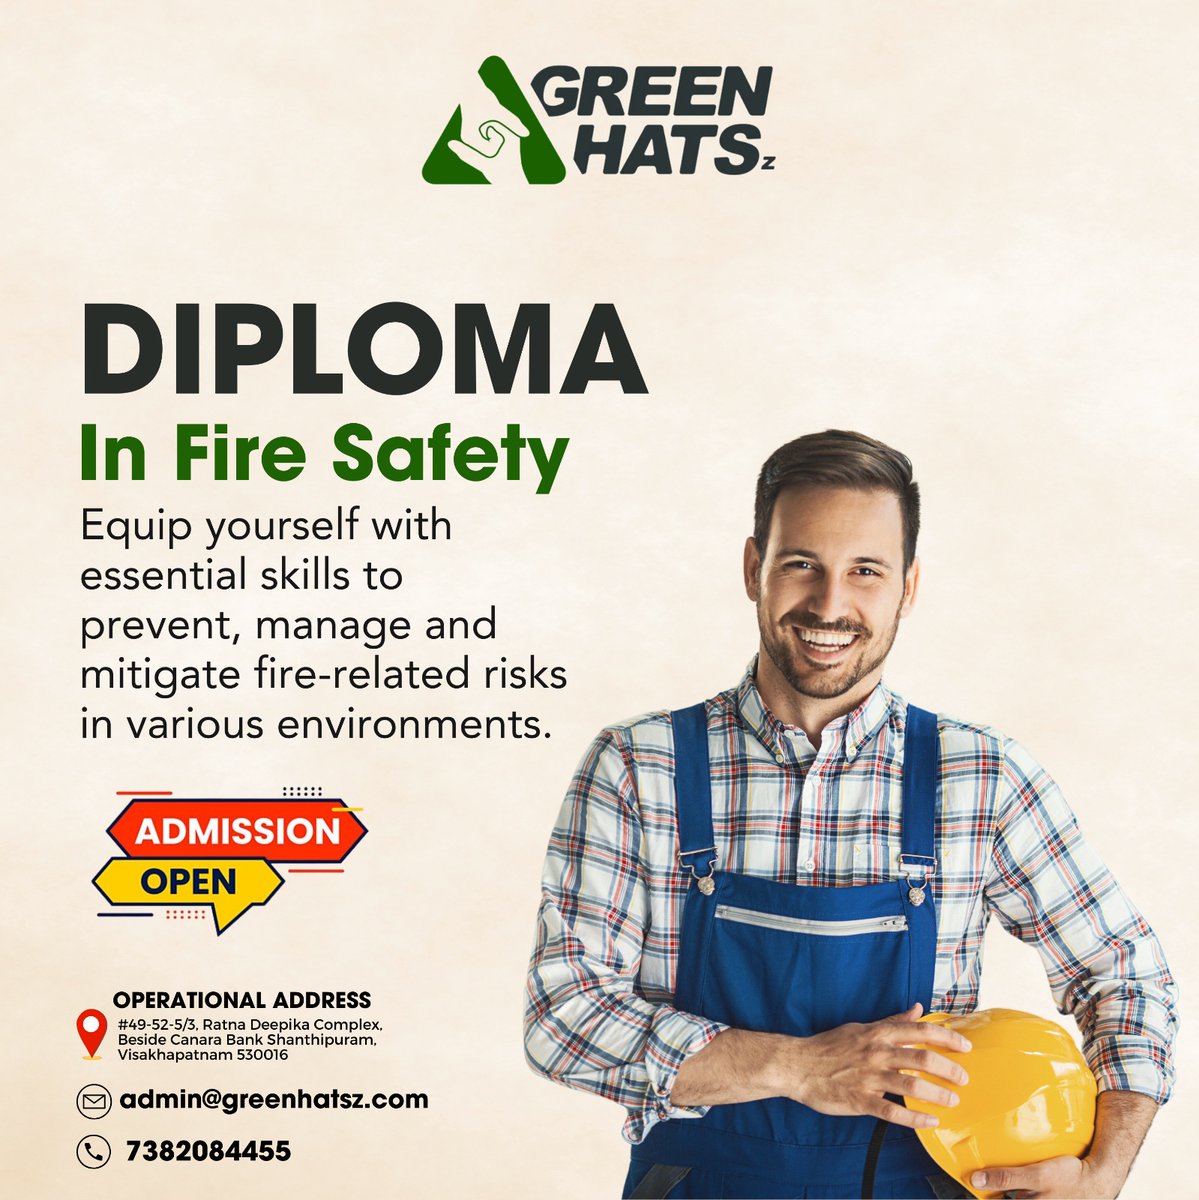 Green Hatsz proudly presents its Diploma in Fire Safety, your gateway to mastering essential skills for preventing, managing and mitigating fire risks across diverse environments.
#Greenhatsz #FireSafetyDiploma #SafetyTraining #FirePrevention #EmergencyResponse #RiskAssessment